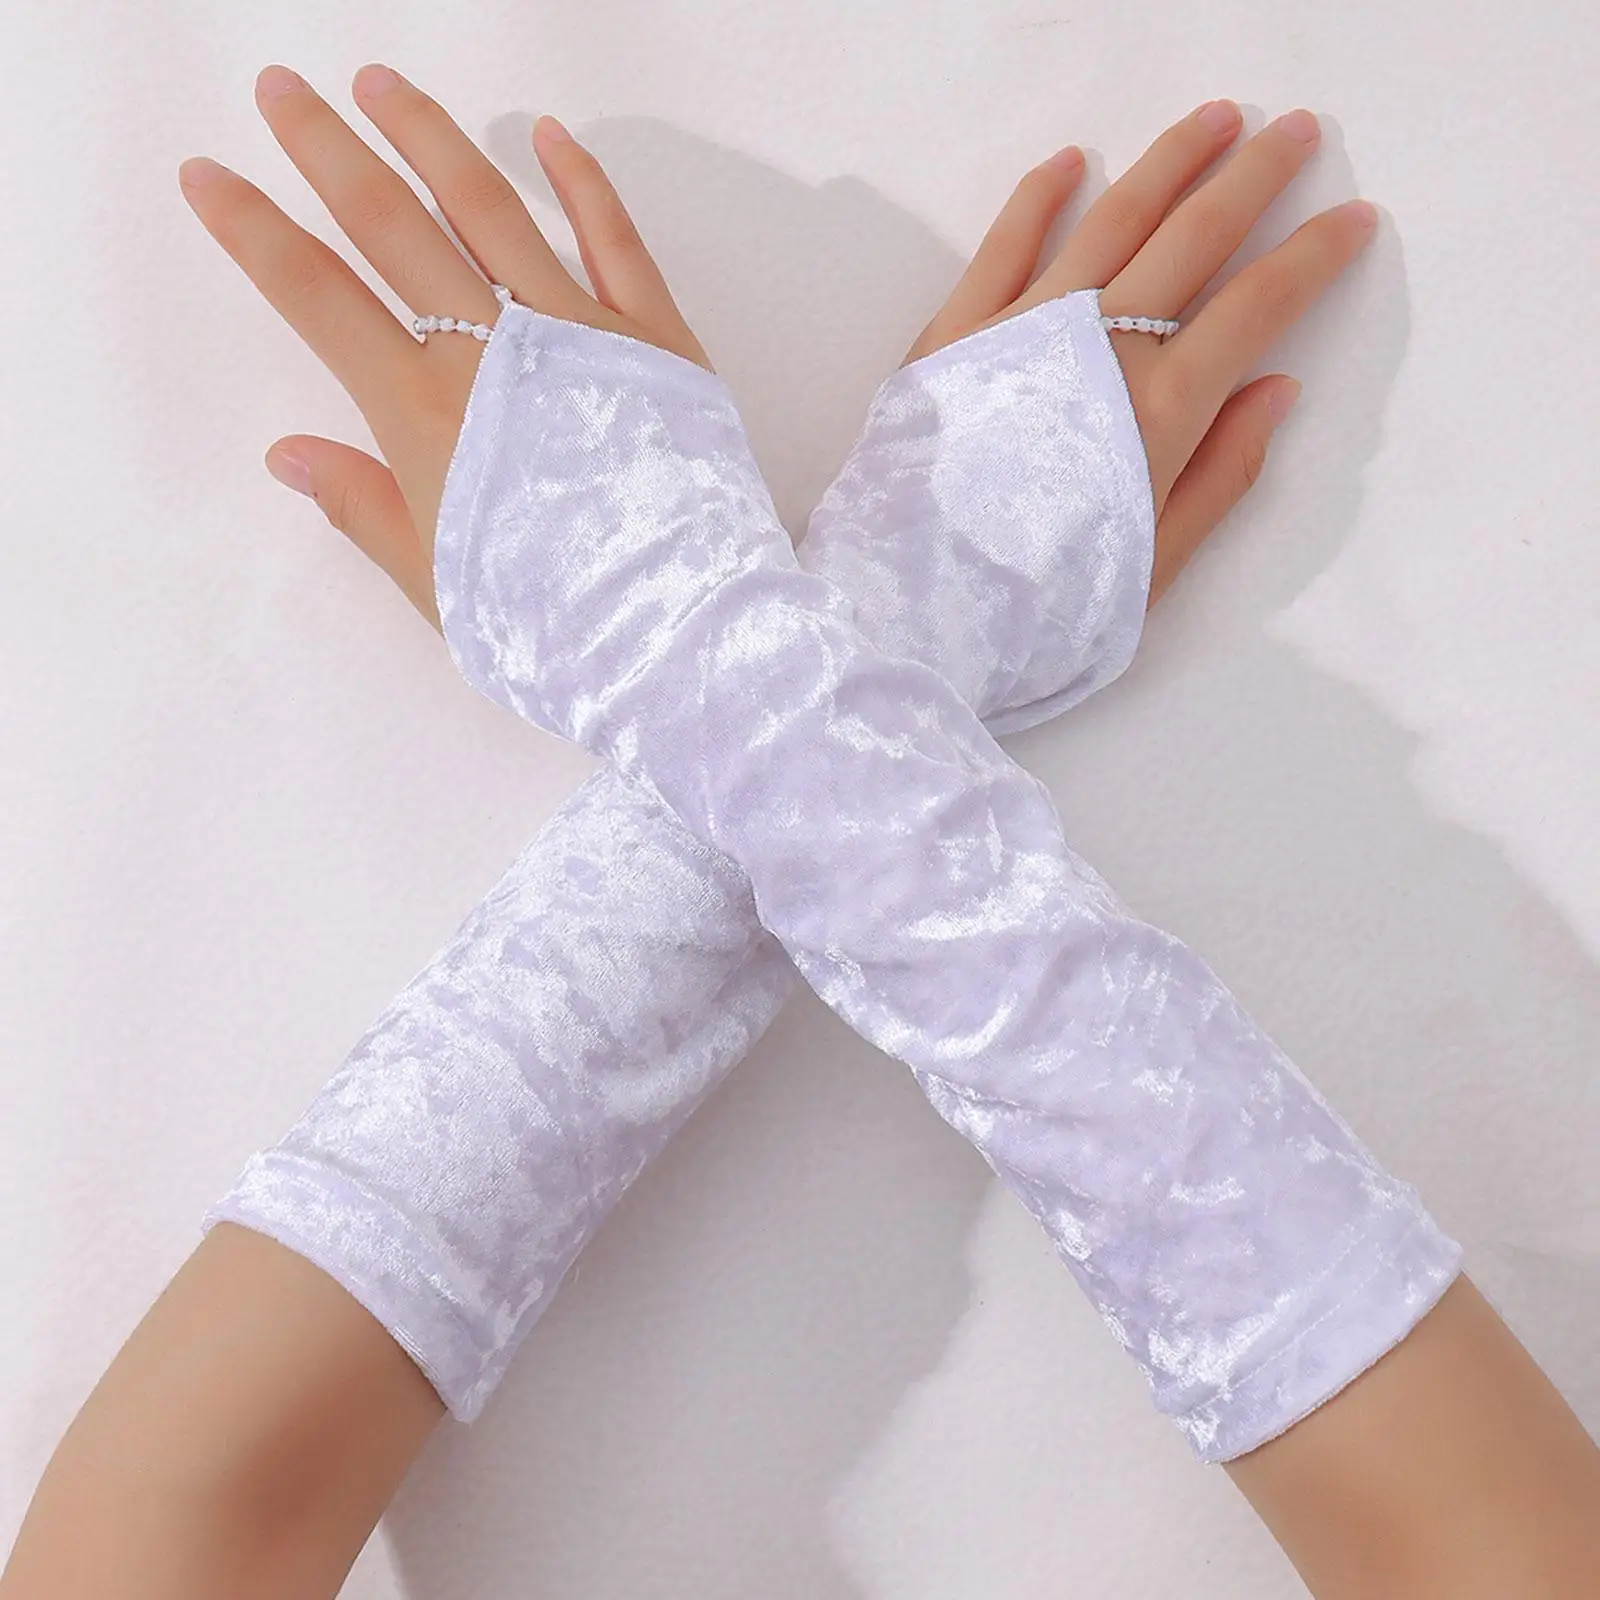 Fashion Fingerless Gloves Arm Warmers Cosplay Sun Protection Ladies Costume